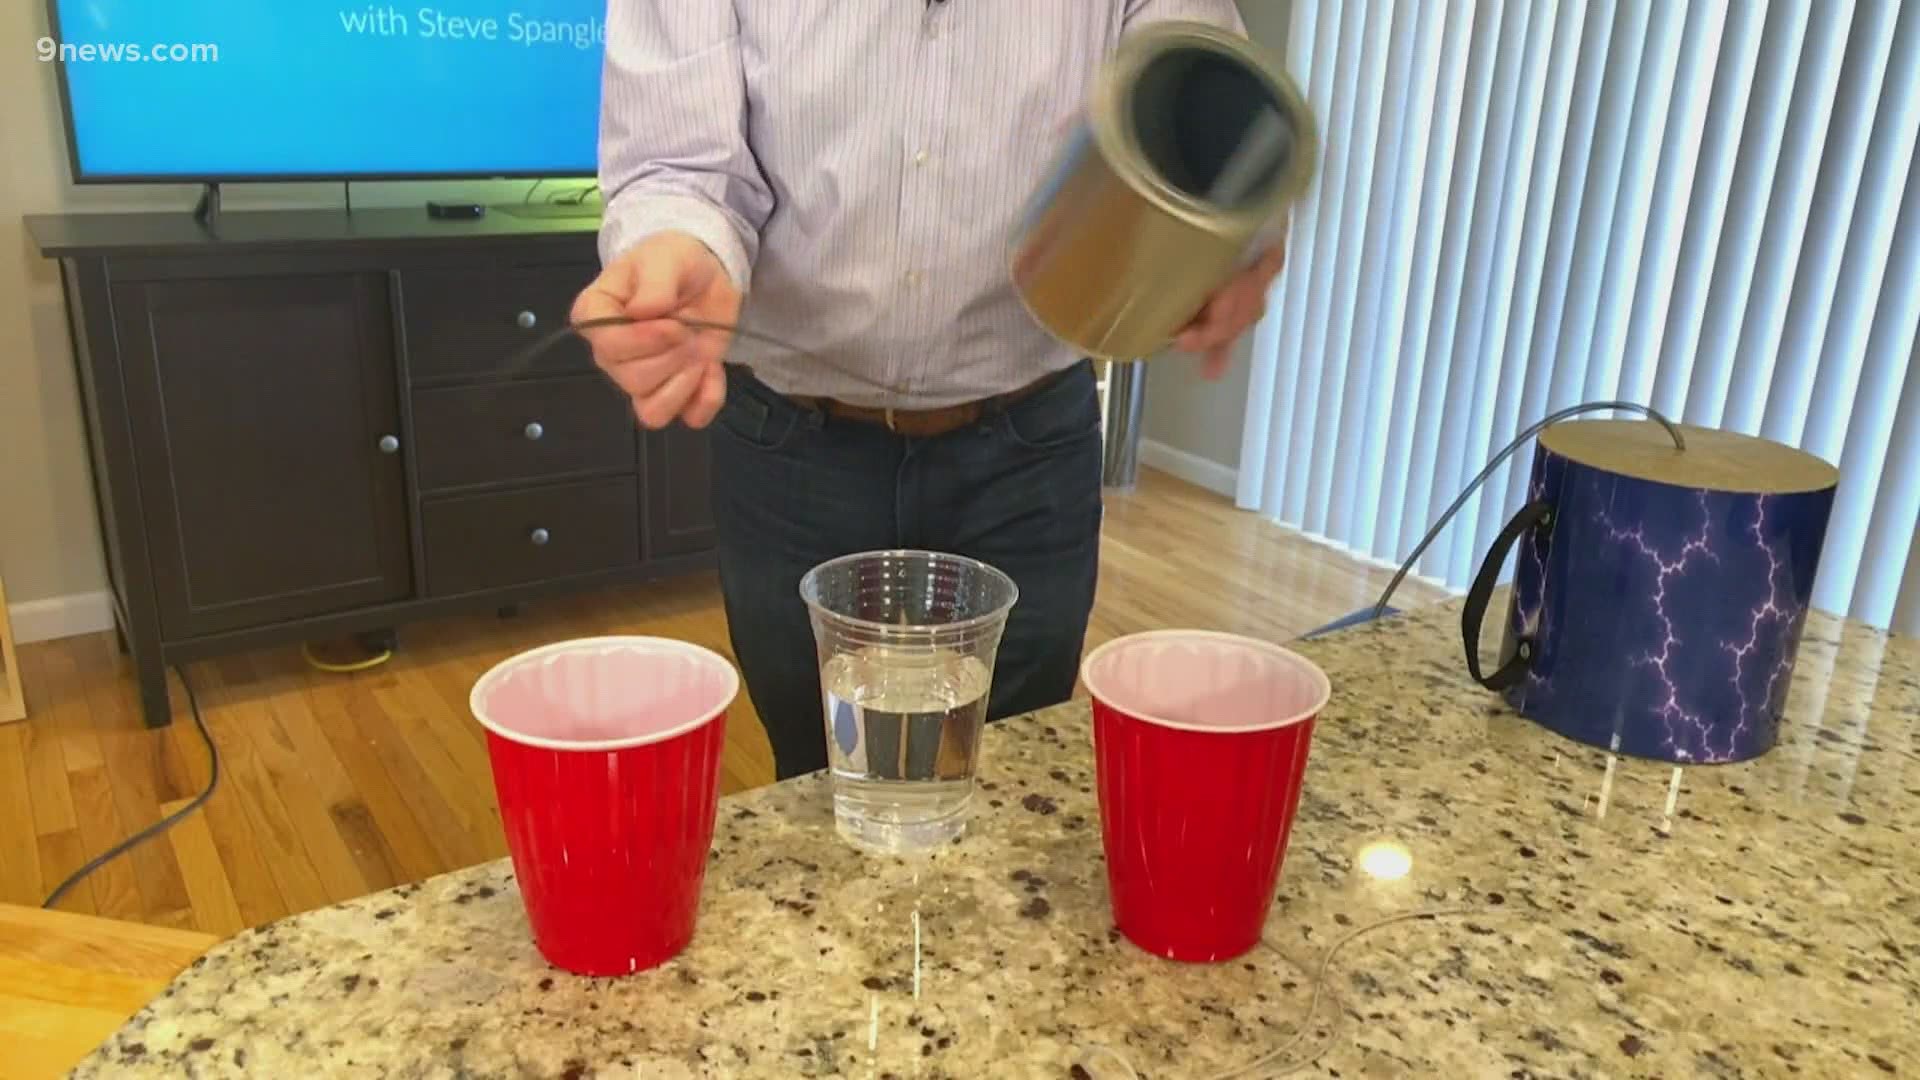 Running out of ways to keep your kids entertained? Our science guy Steve Spangler has got you covered.